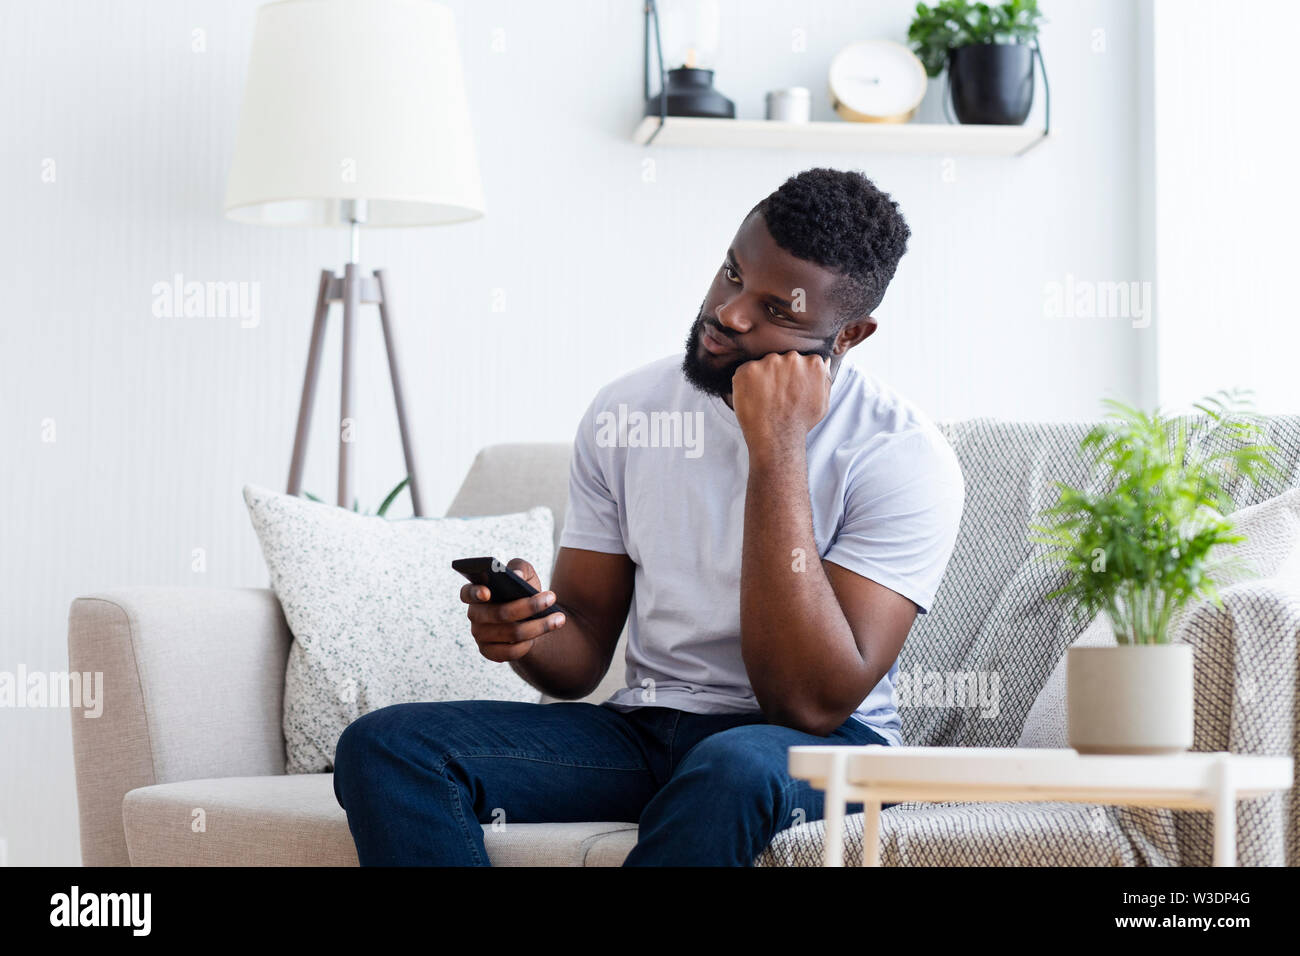 Young man watching tv, using remote control to switch channels Stock Photo